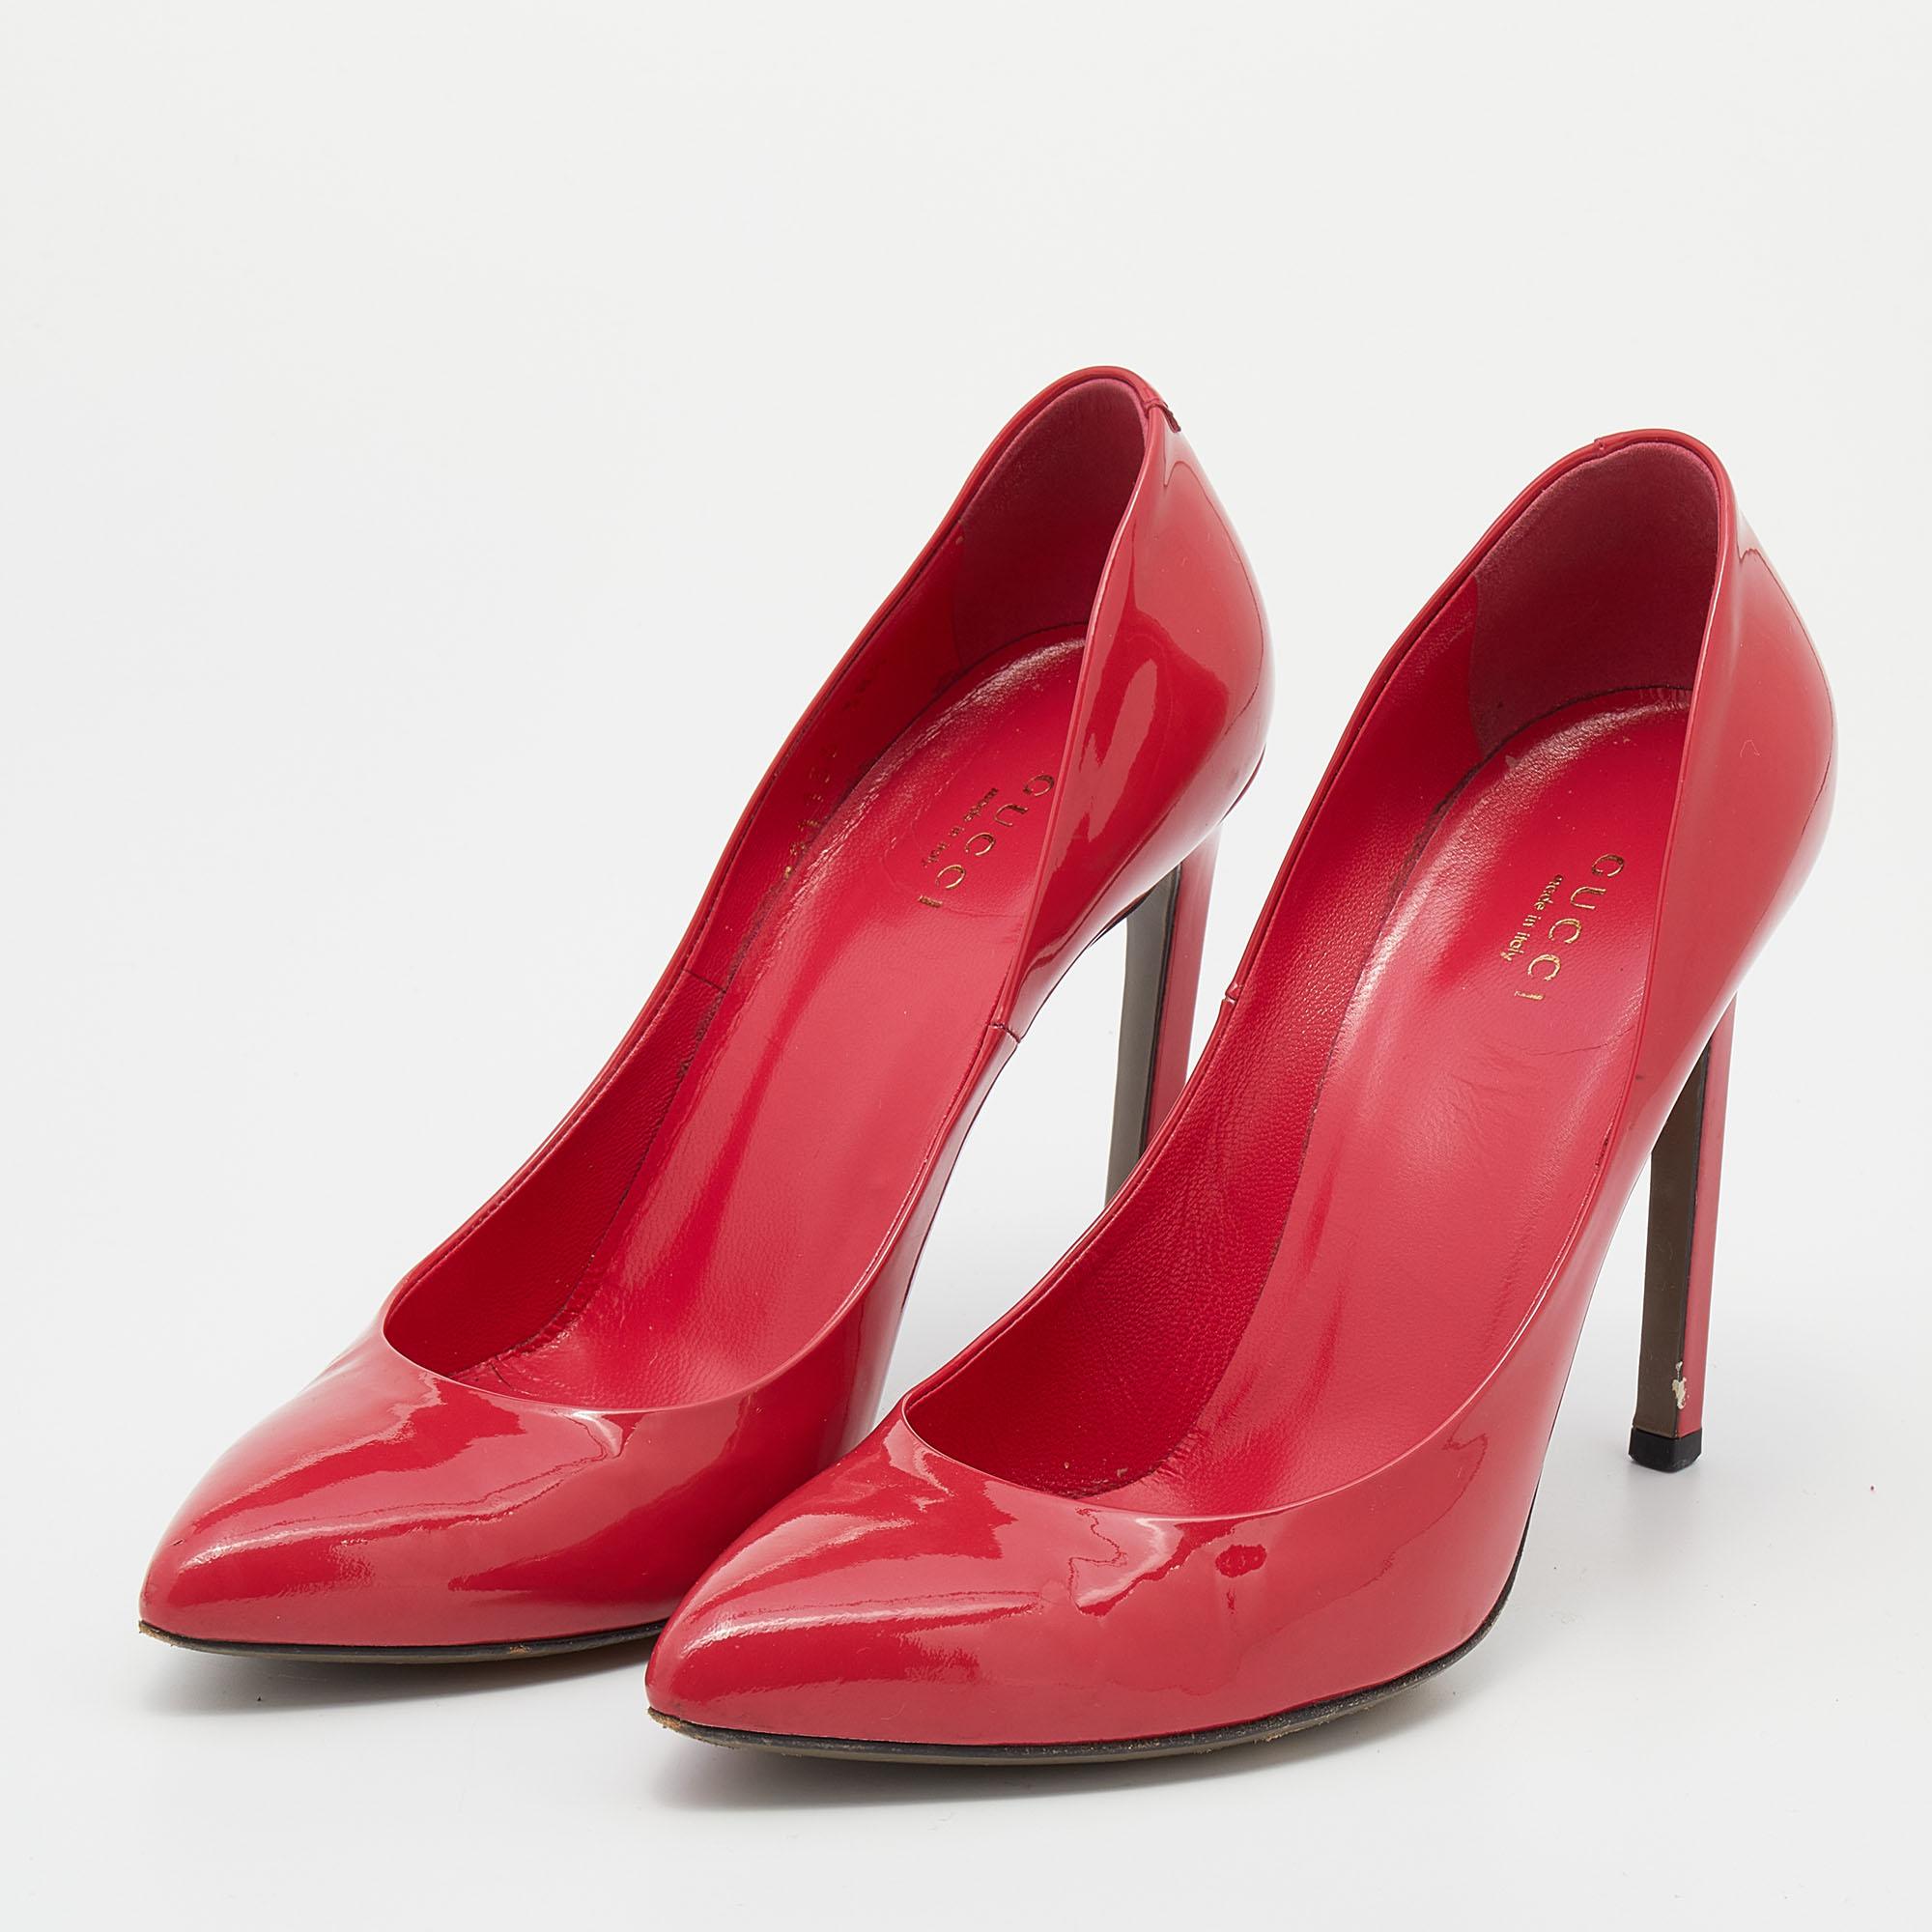 There are some shoes that stand the test of time and fashion cycles, these timeless Gucci pumps are the one. Crafted from patent leather in a pink shade, they are designed with sleek cuts, pointed-toes, and tall heels.

